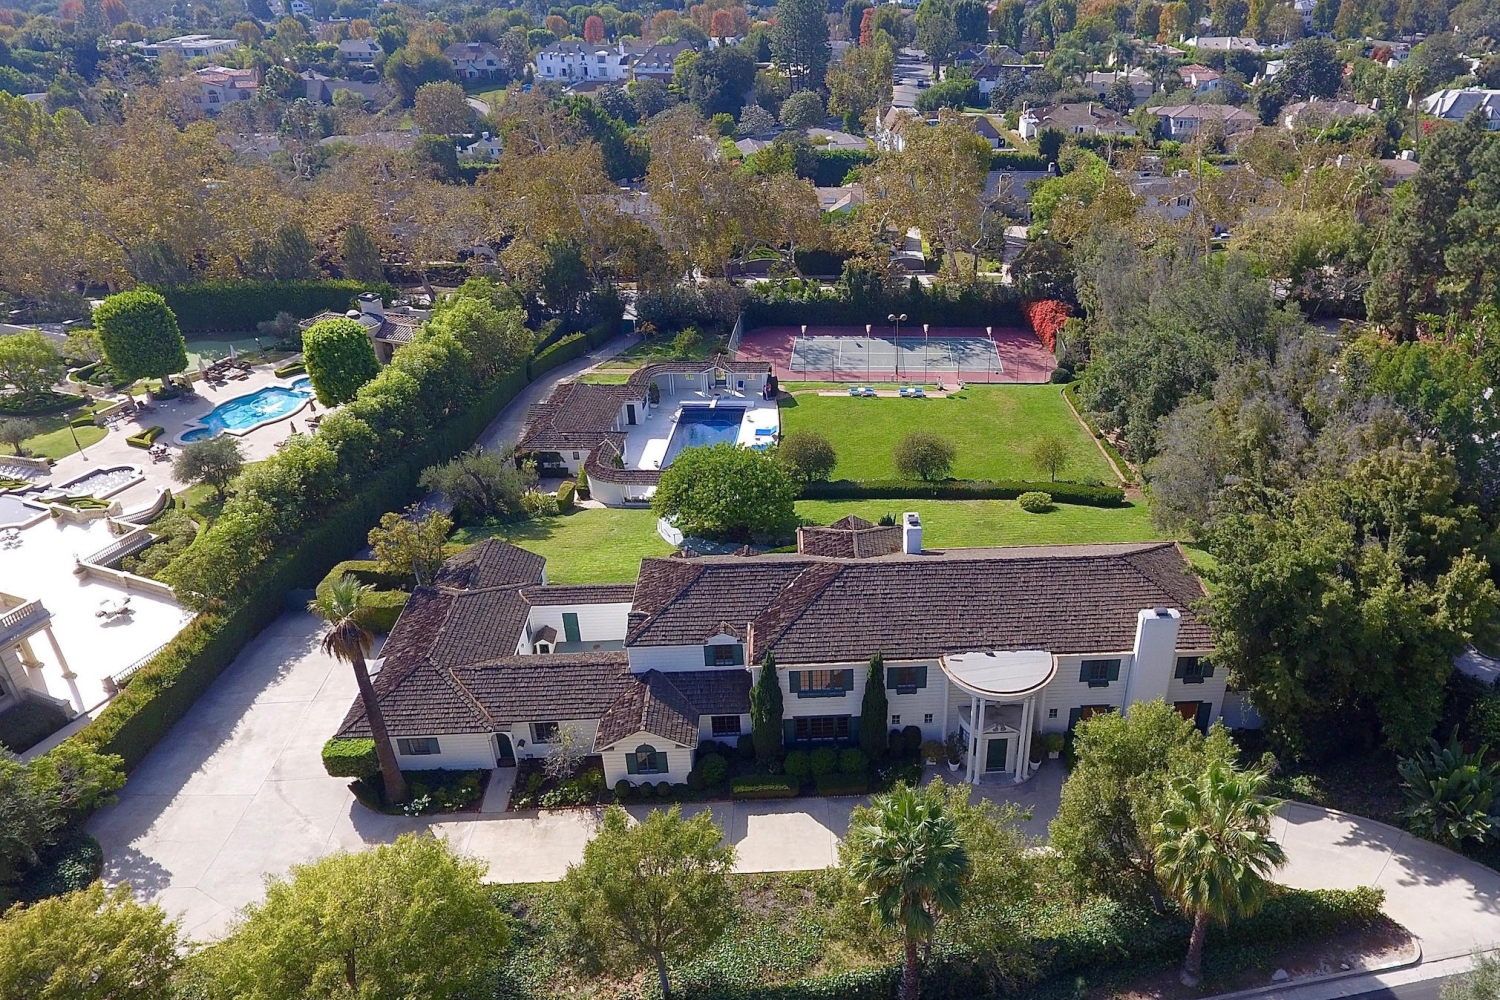 355 South Mapleton Drive In Holmby Hills SOLD For $188 Million.